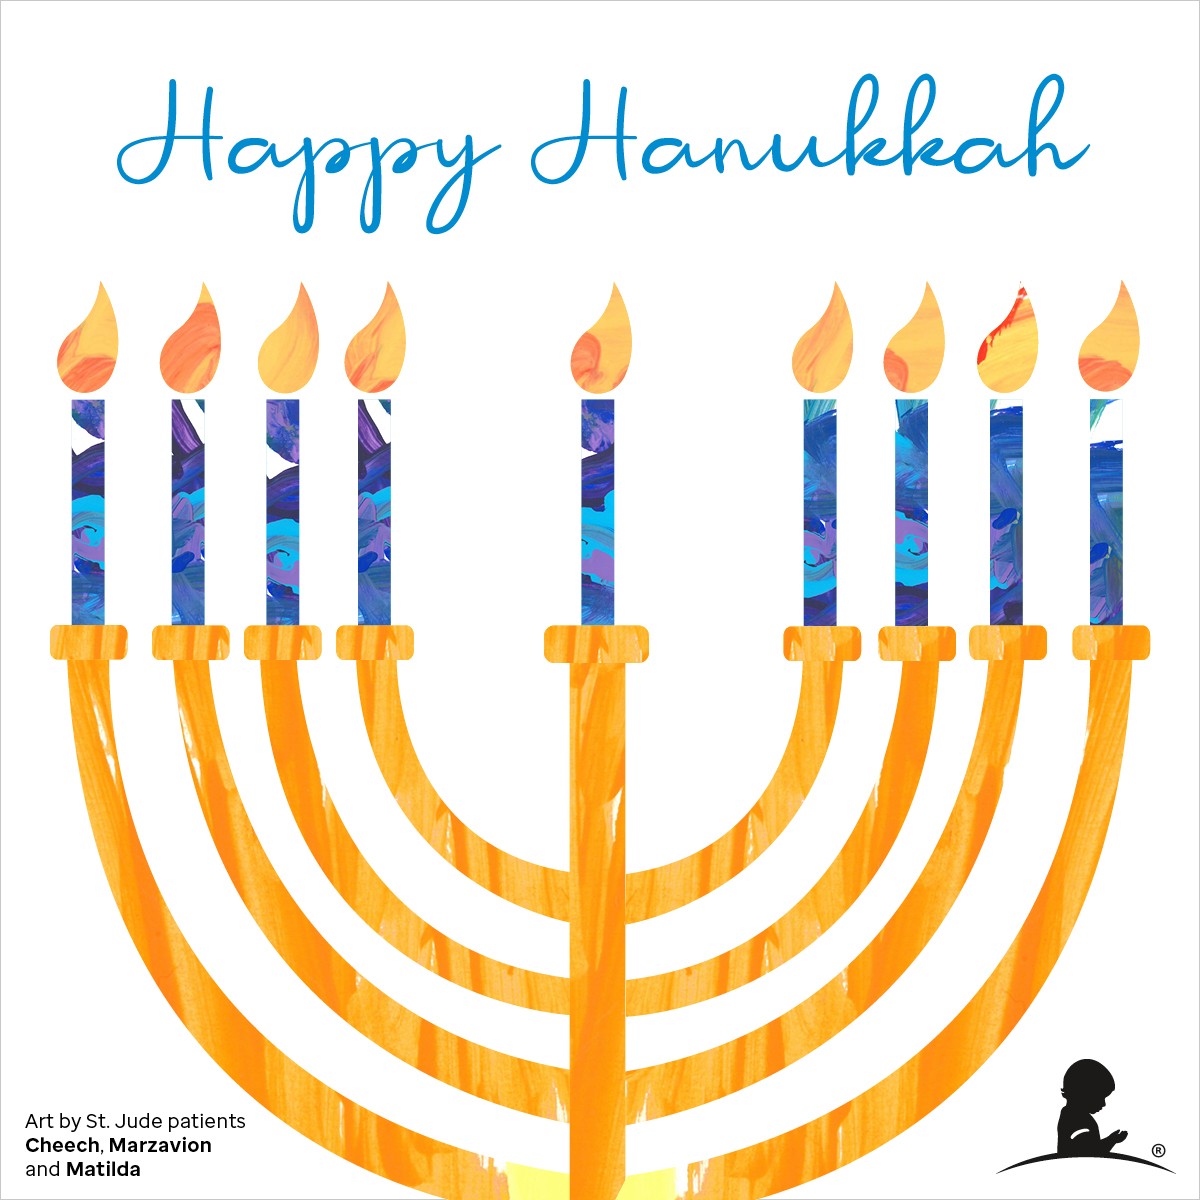 Happy Hanukkah card artwork of candles in a menorah inspired by St. Jude patients Cheech, Marzavion and Matilda.